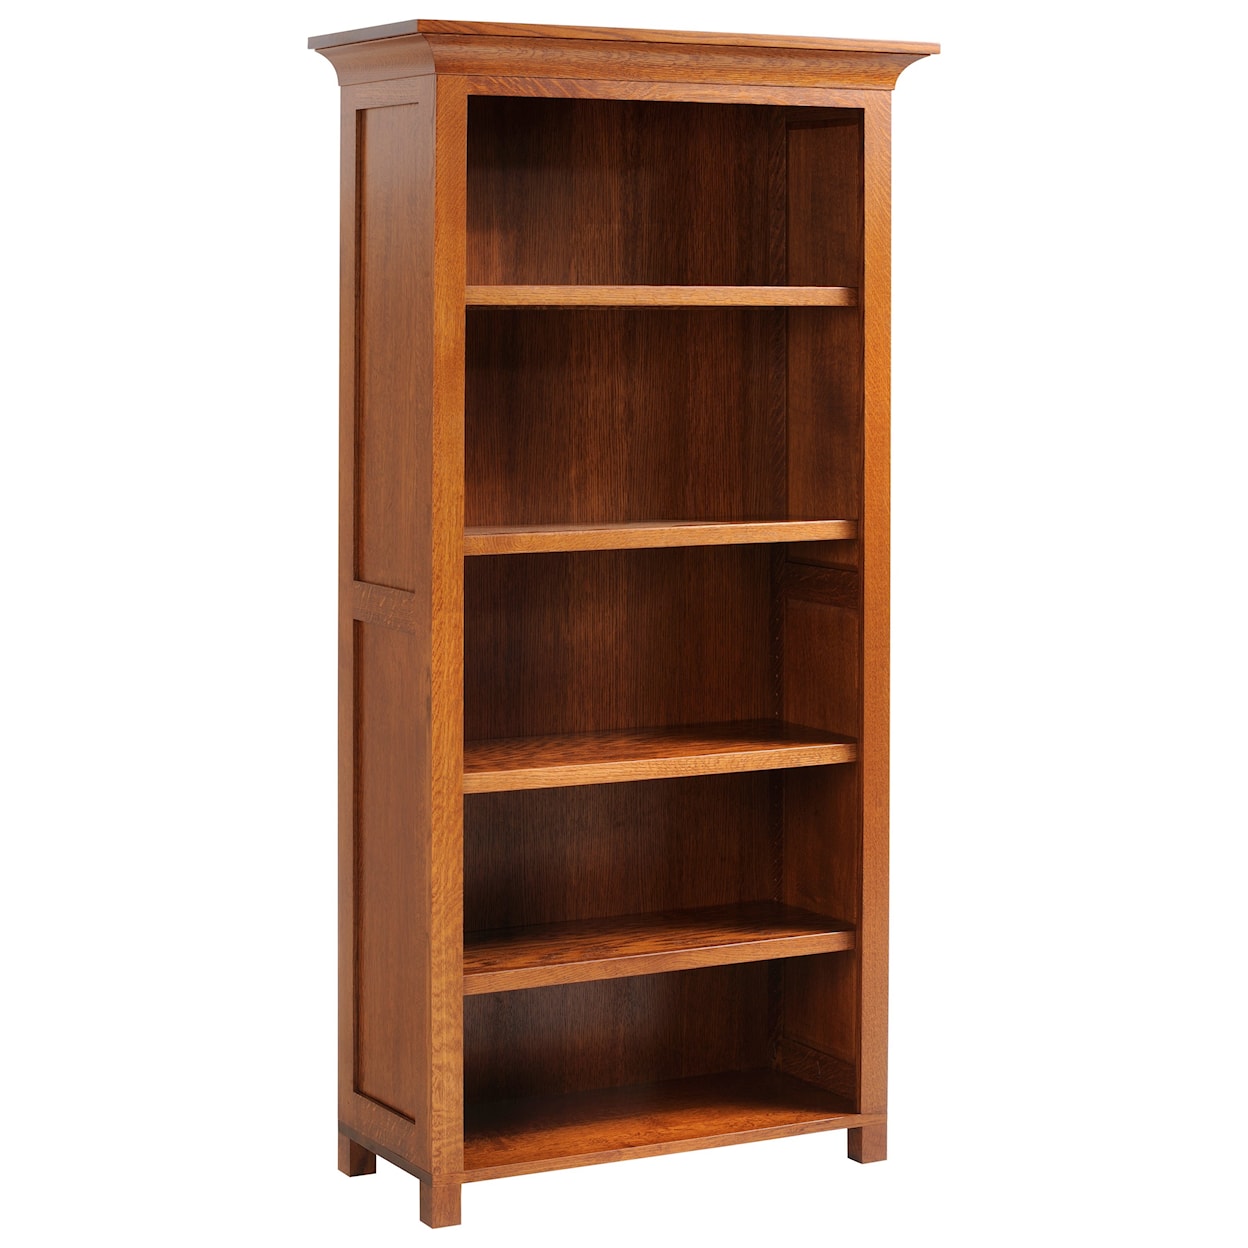 Y & T Woodcraft Coventry Mission 72" Bookcase